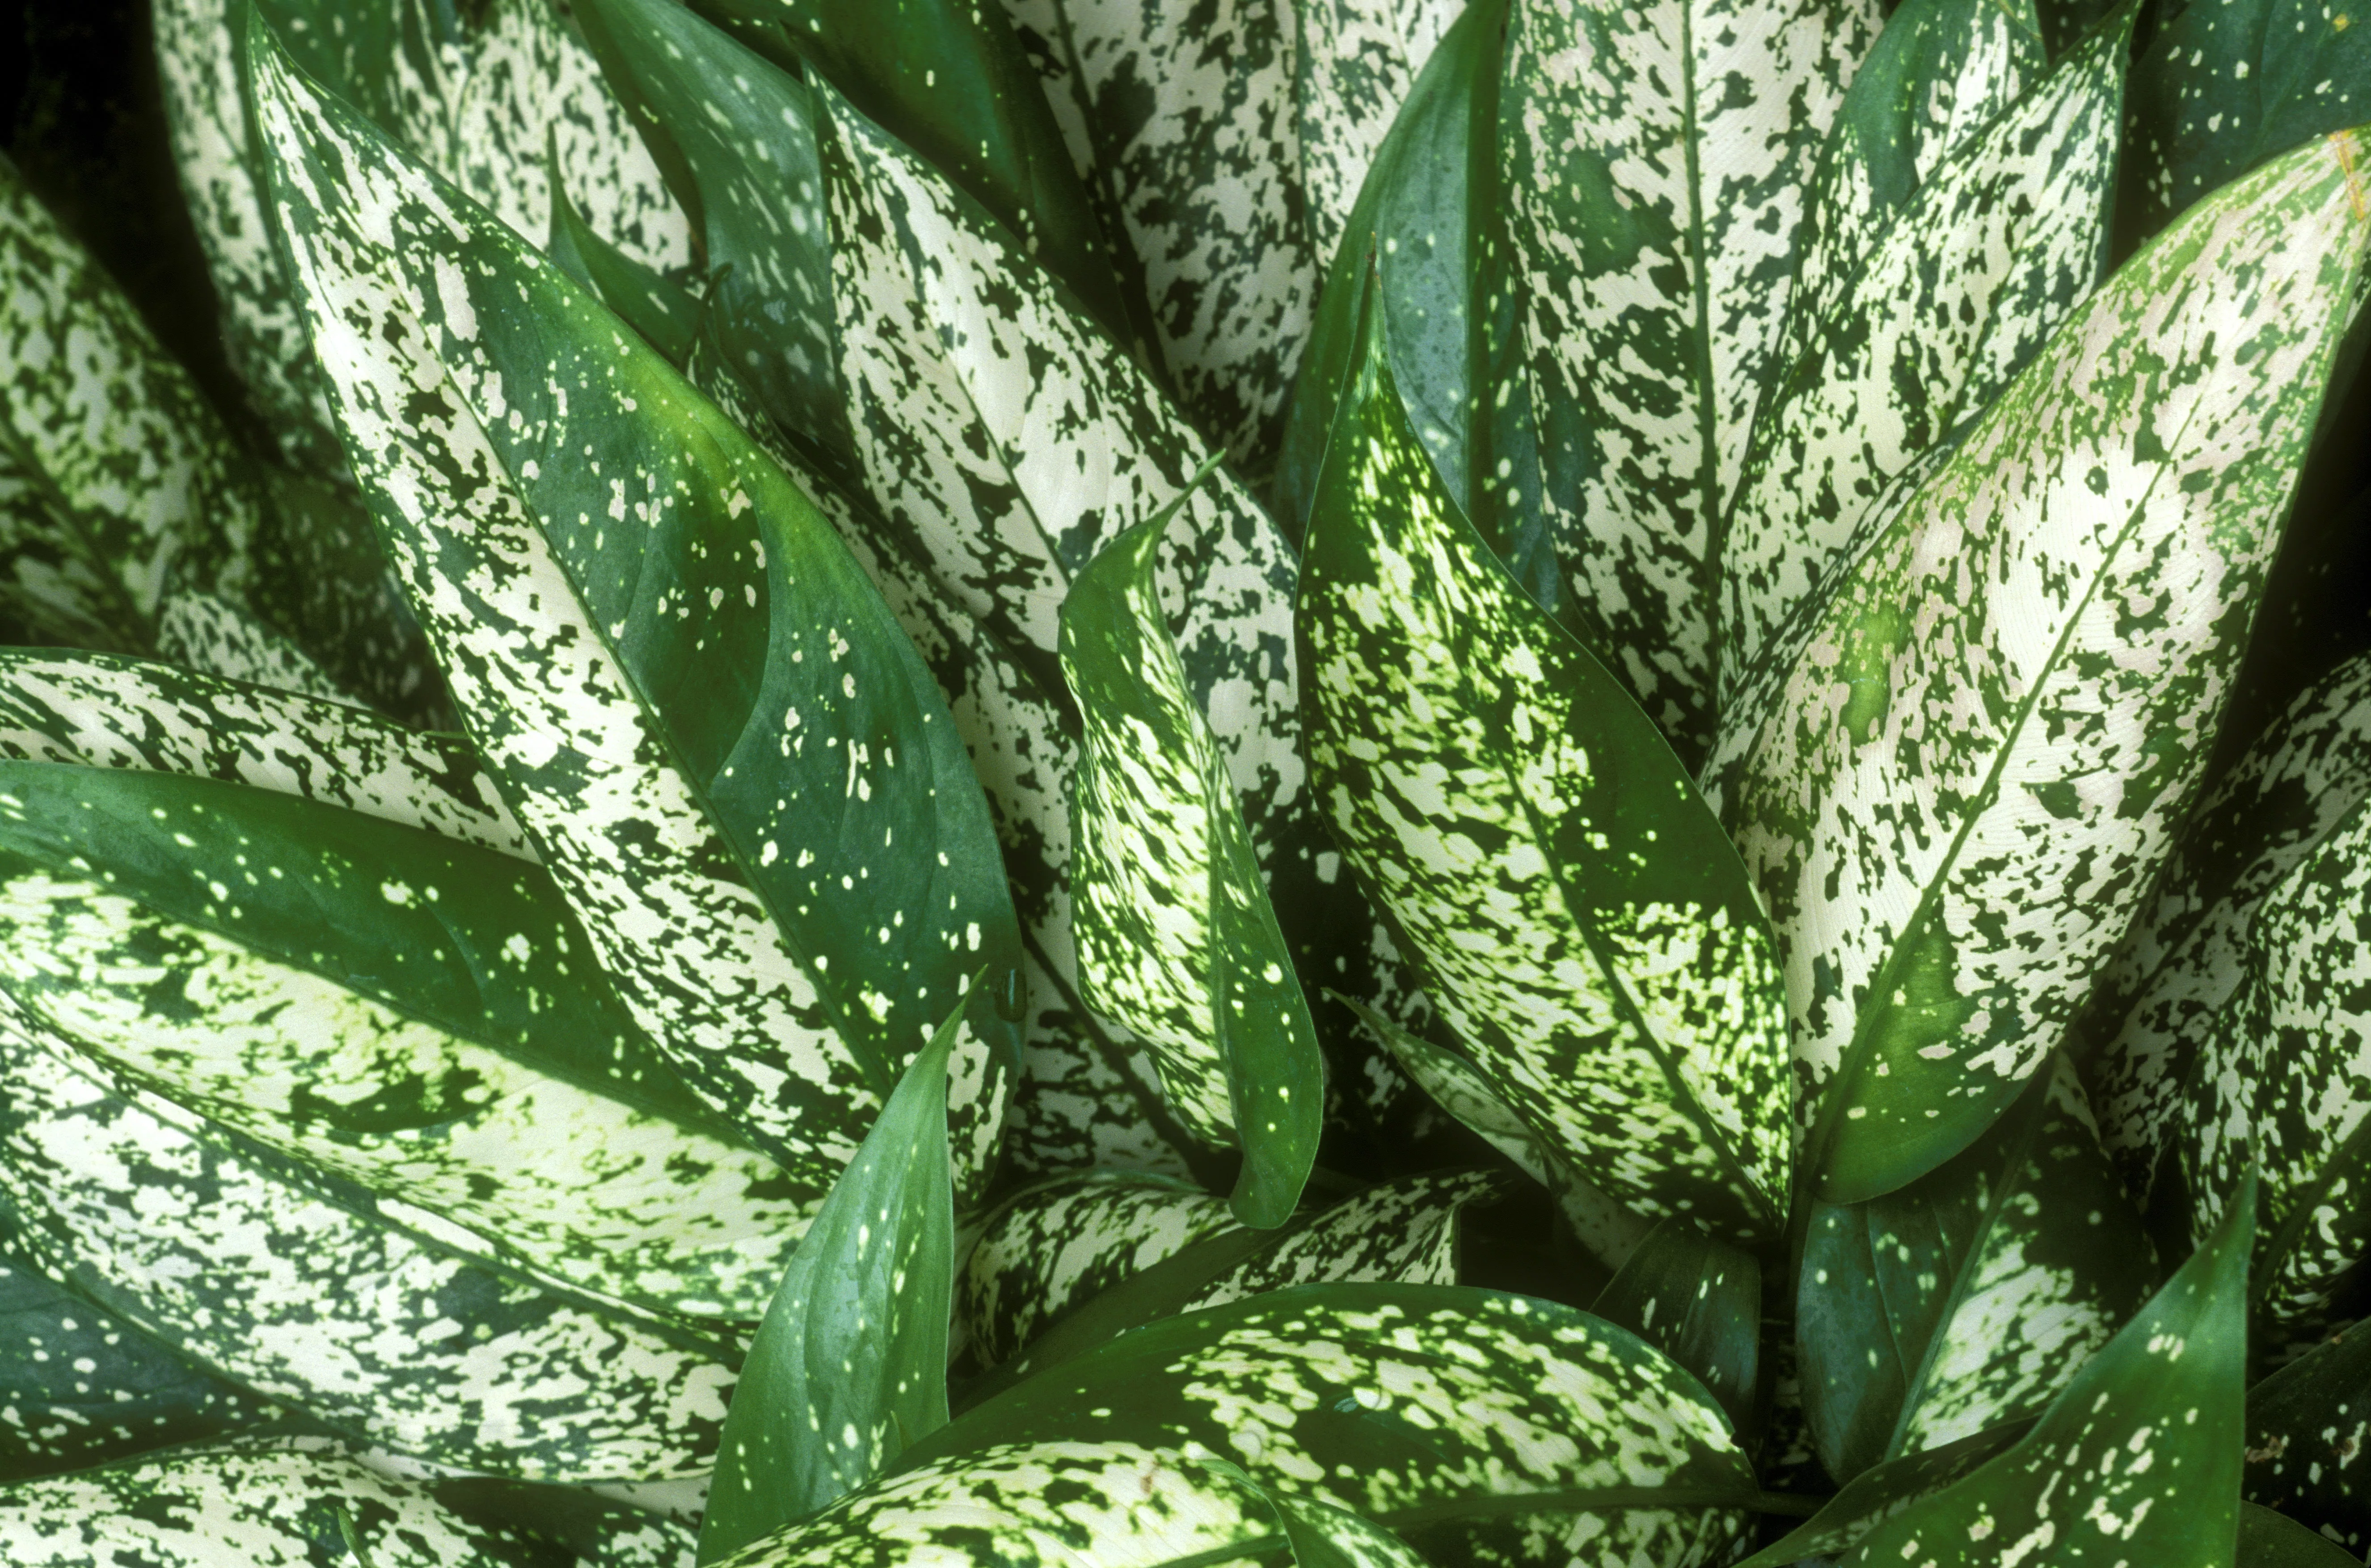 A close-up shot of plant leaves with splotchy green-white coloration